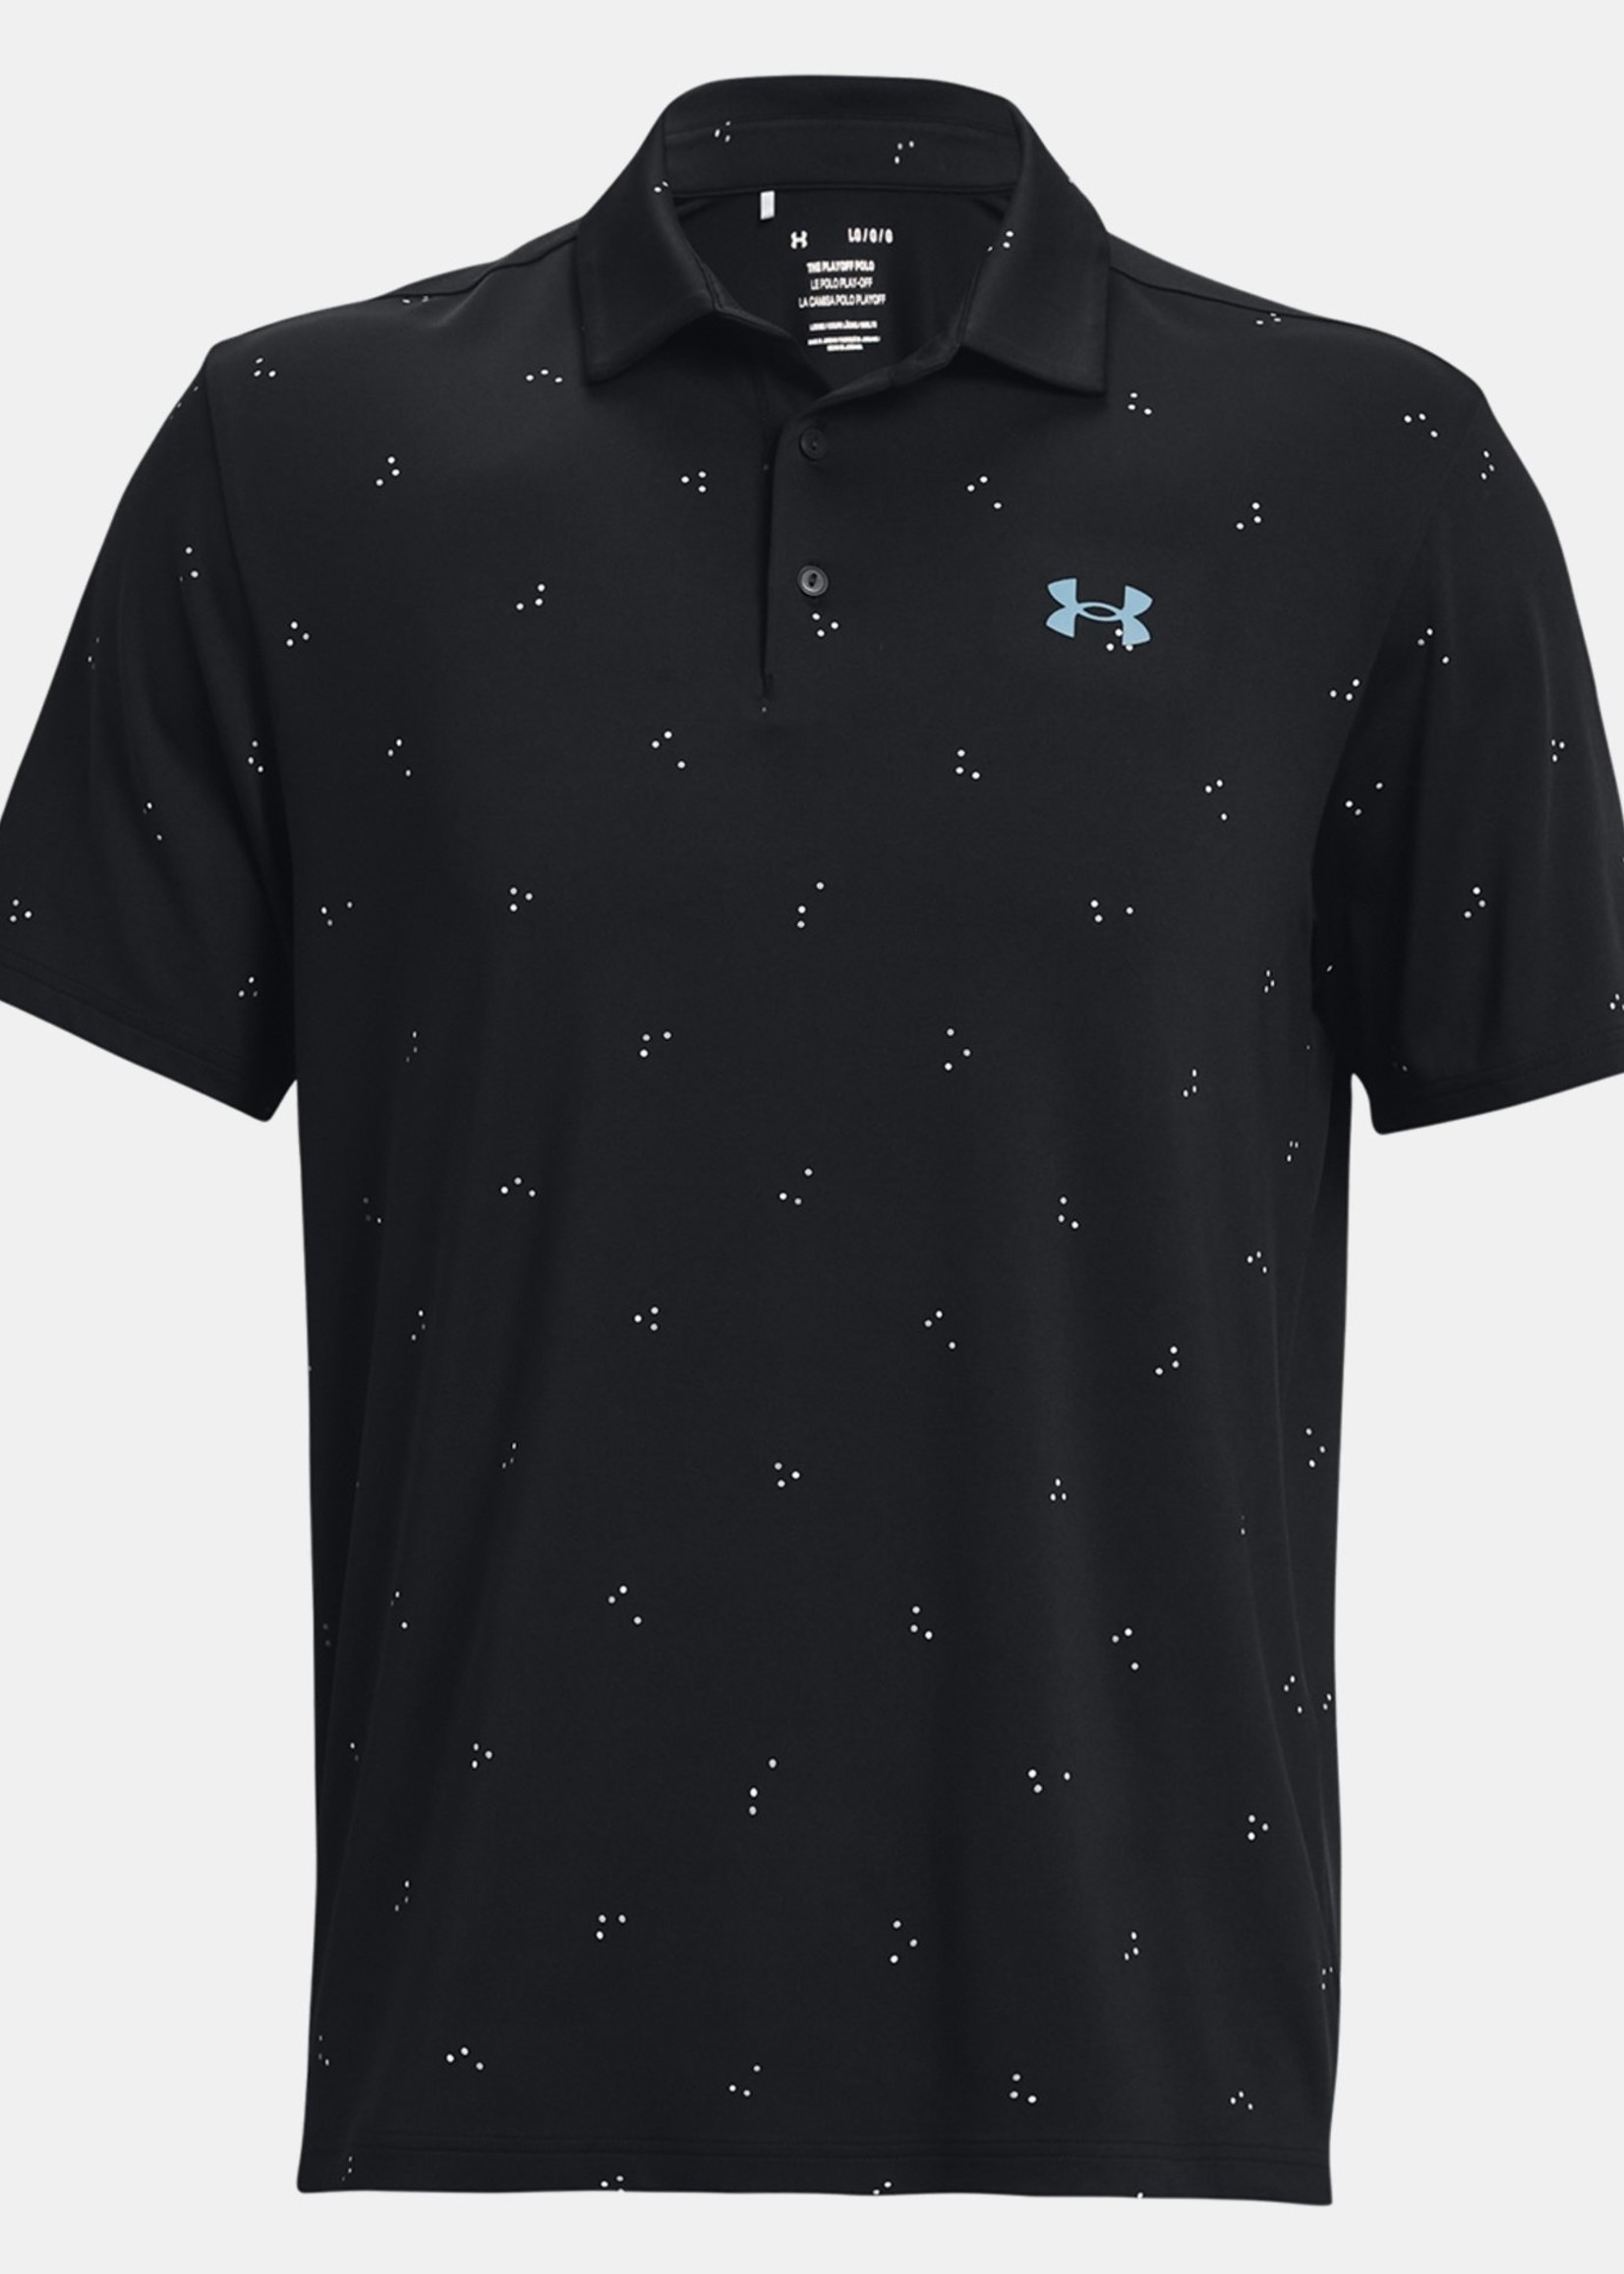 Under Armour Playoff 3.0 Polo